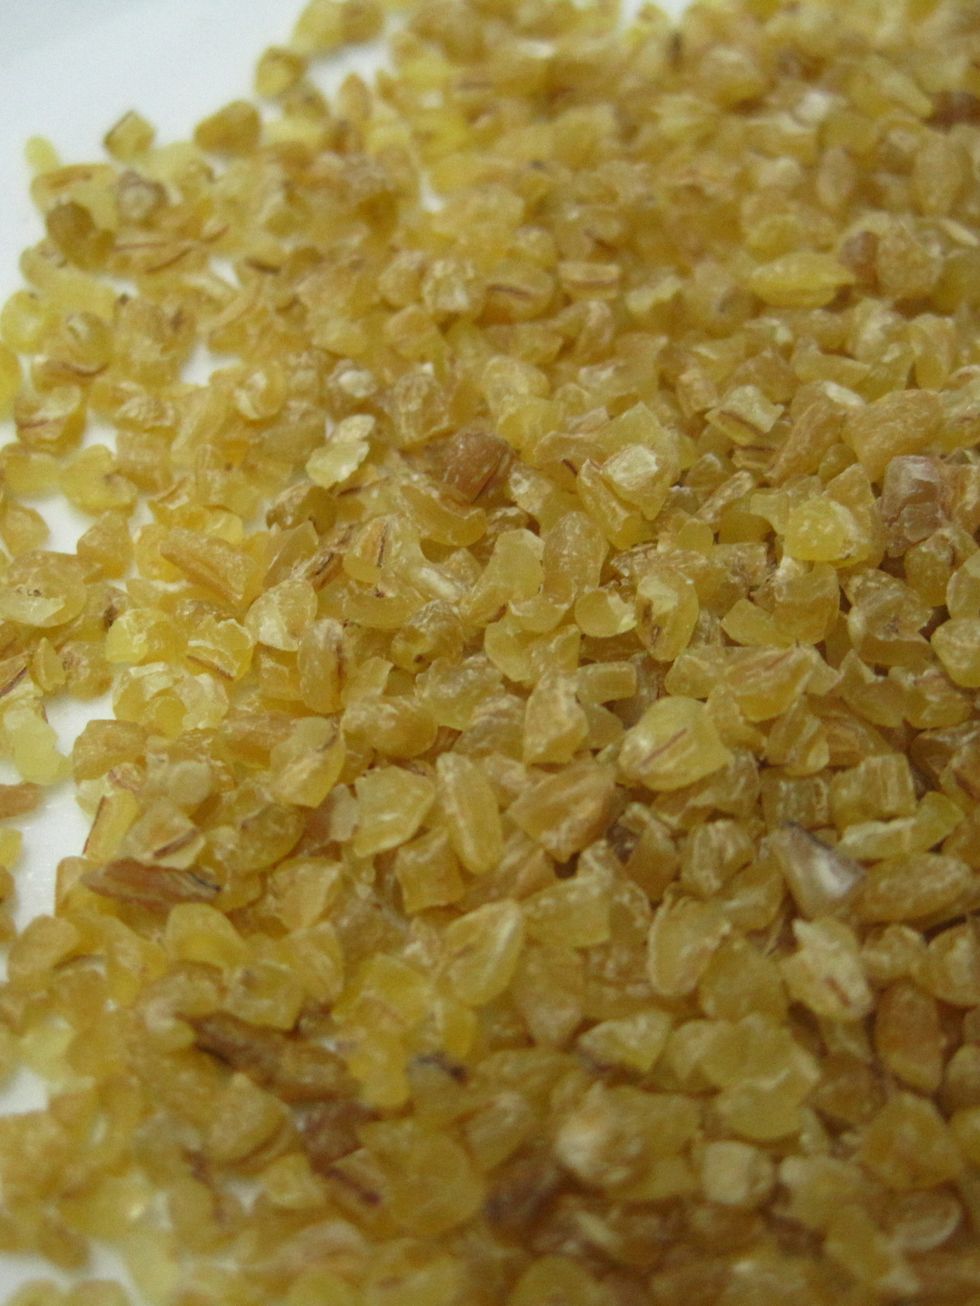 Yellow, Ingredient, Natural material, Beige, Close-up, Chemical compound, Staple food, Macro photography, 